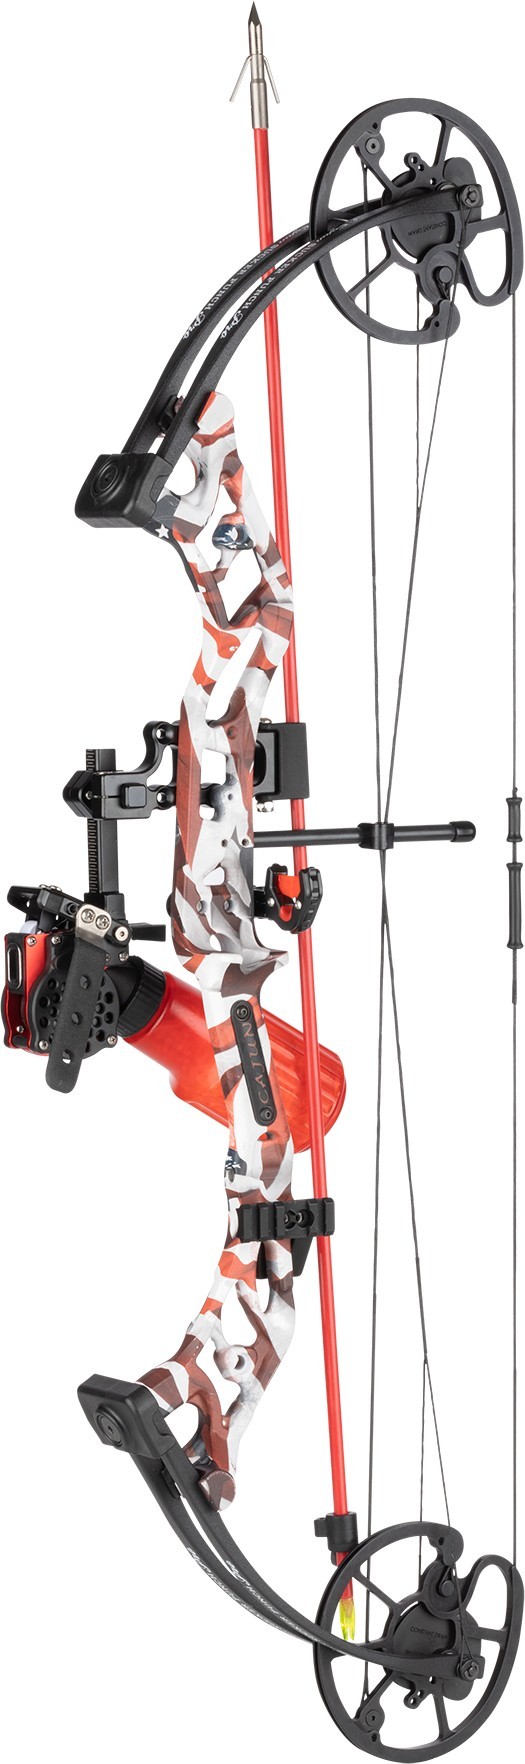 A Roundup of New Compound Bows